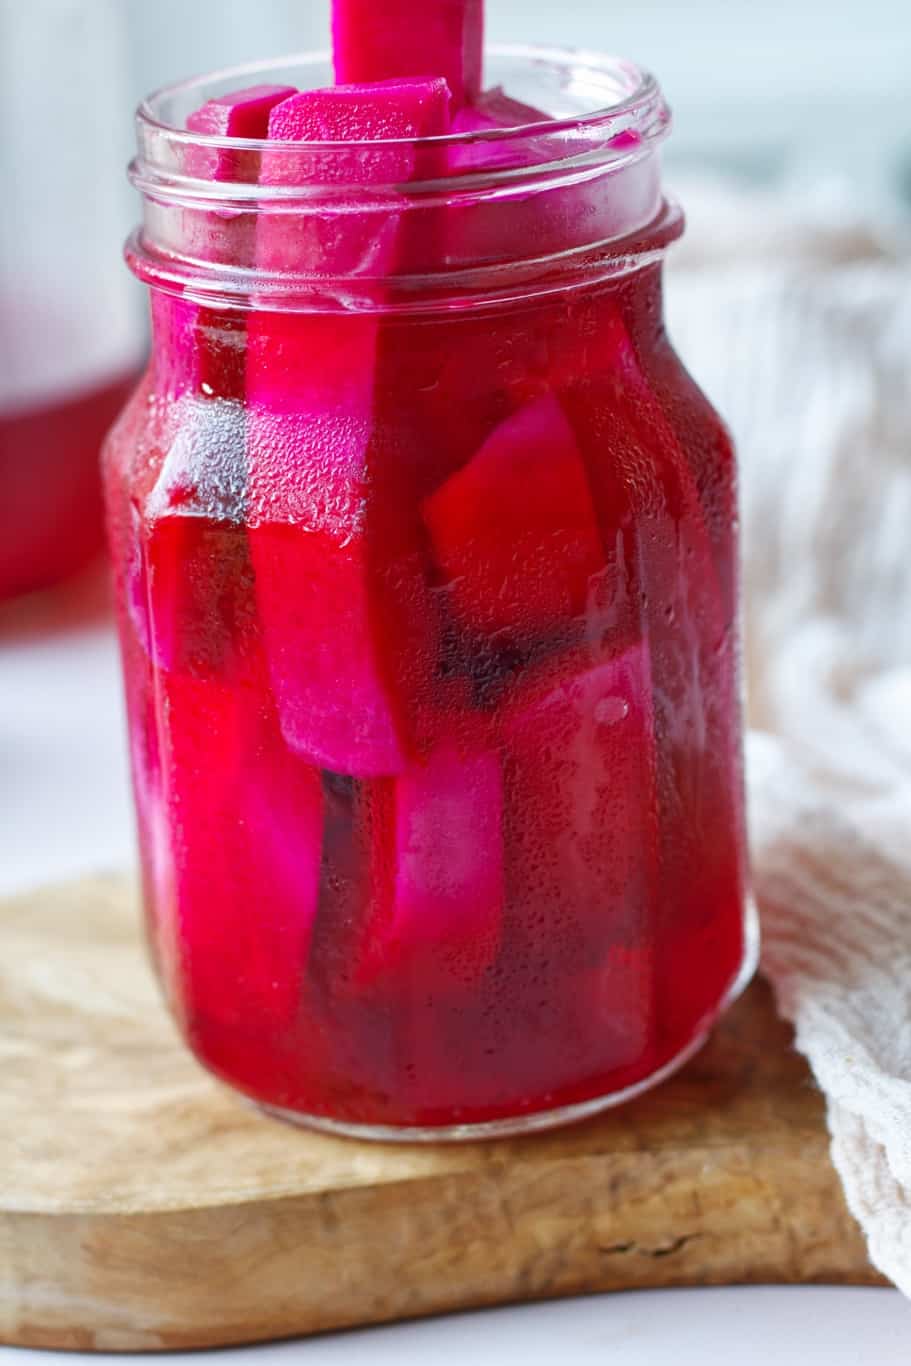 a jar of refrigerator pickled turnips having wonderful pink color and perfectly crunchy texture and yummy tangy flavor